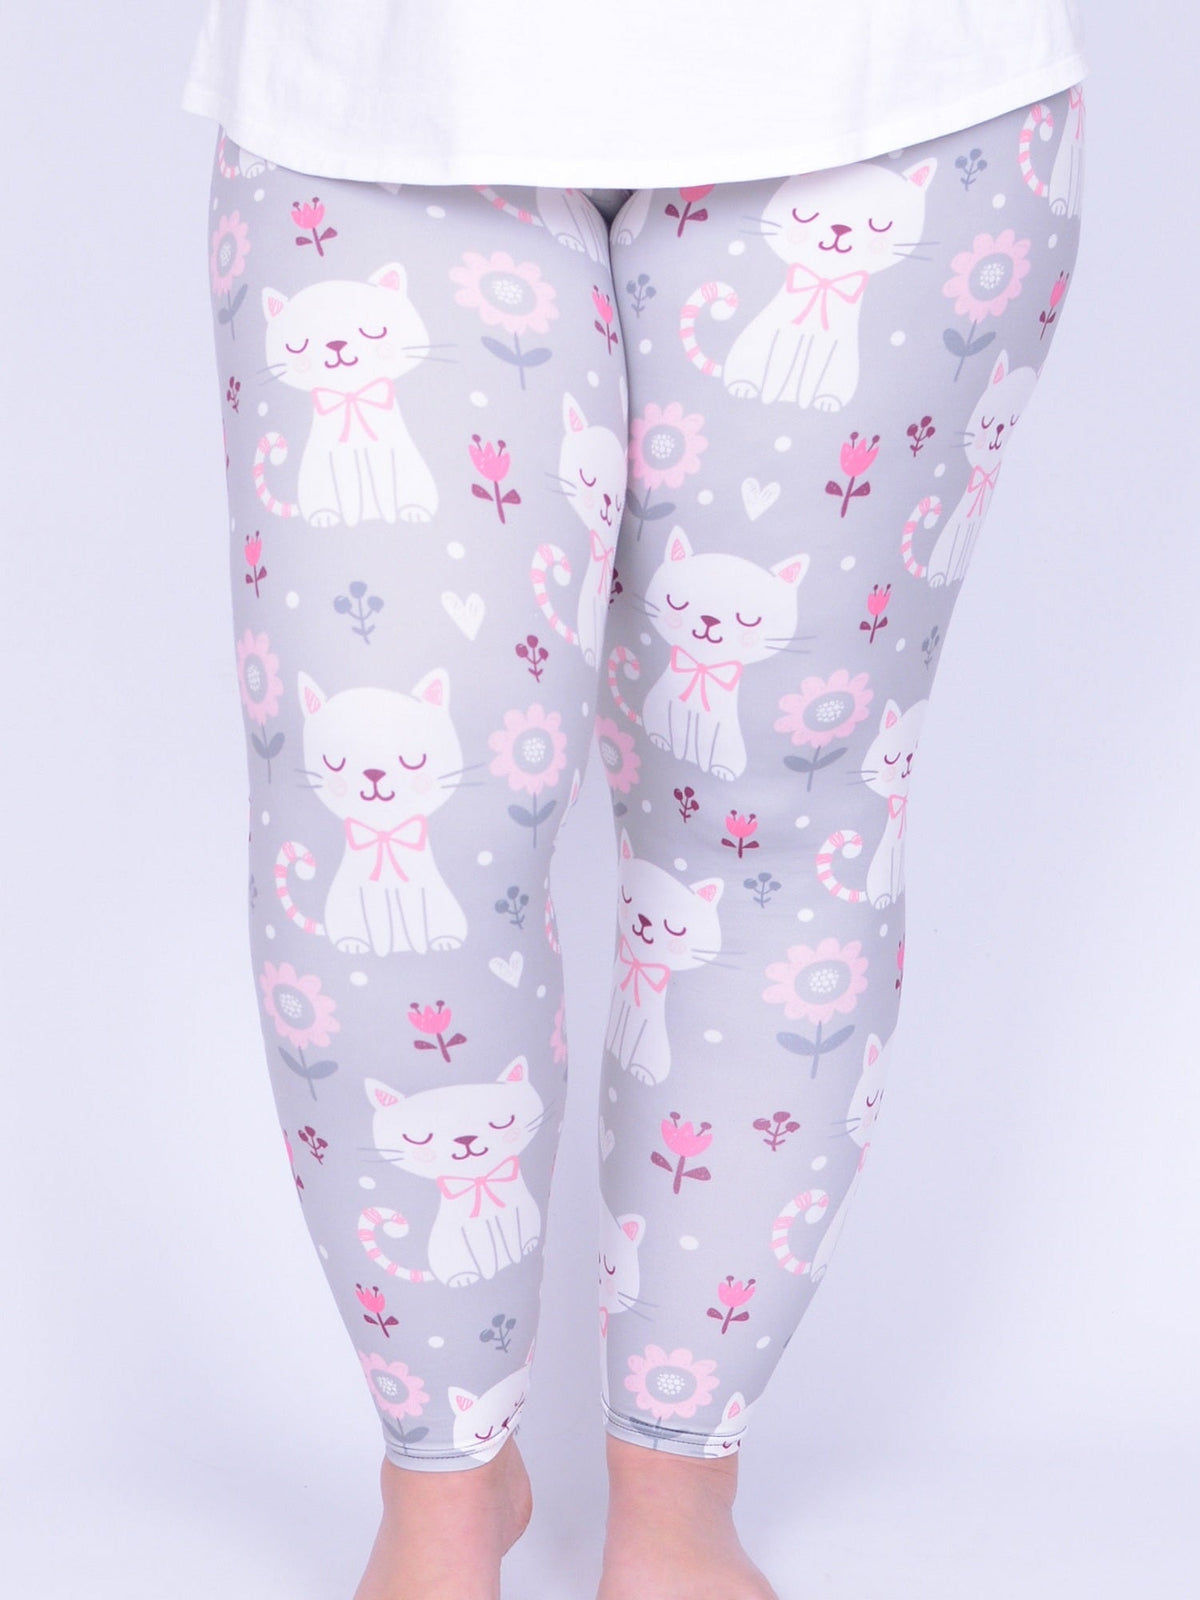 Leggings - Cute Cats/Kittens - L41, Trousers, Pure Plus Clothing, Lagenlook Clothing, Plus Size Fashion, Over 50 Fashion